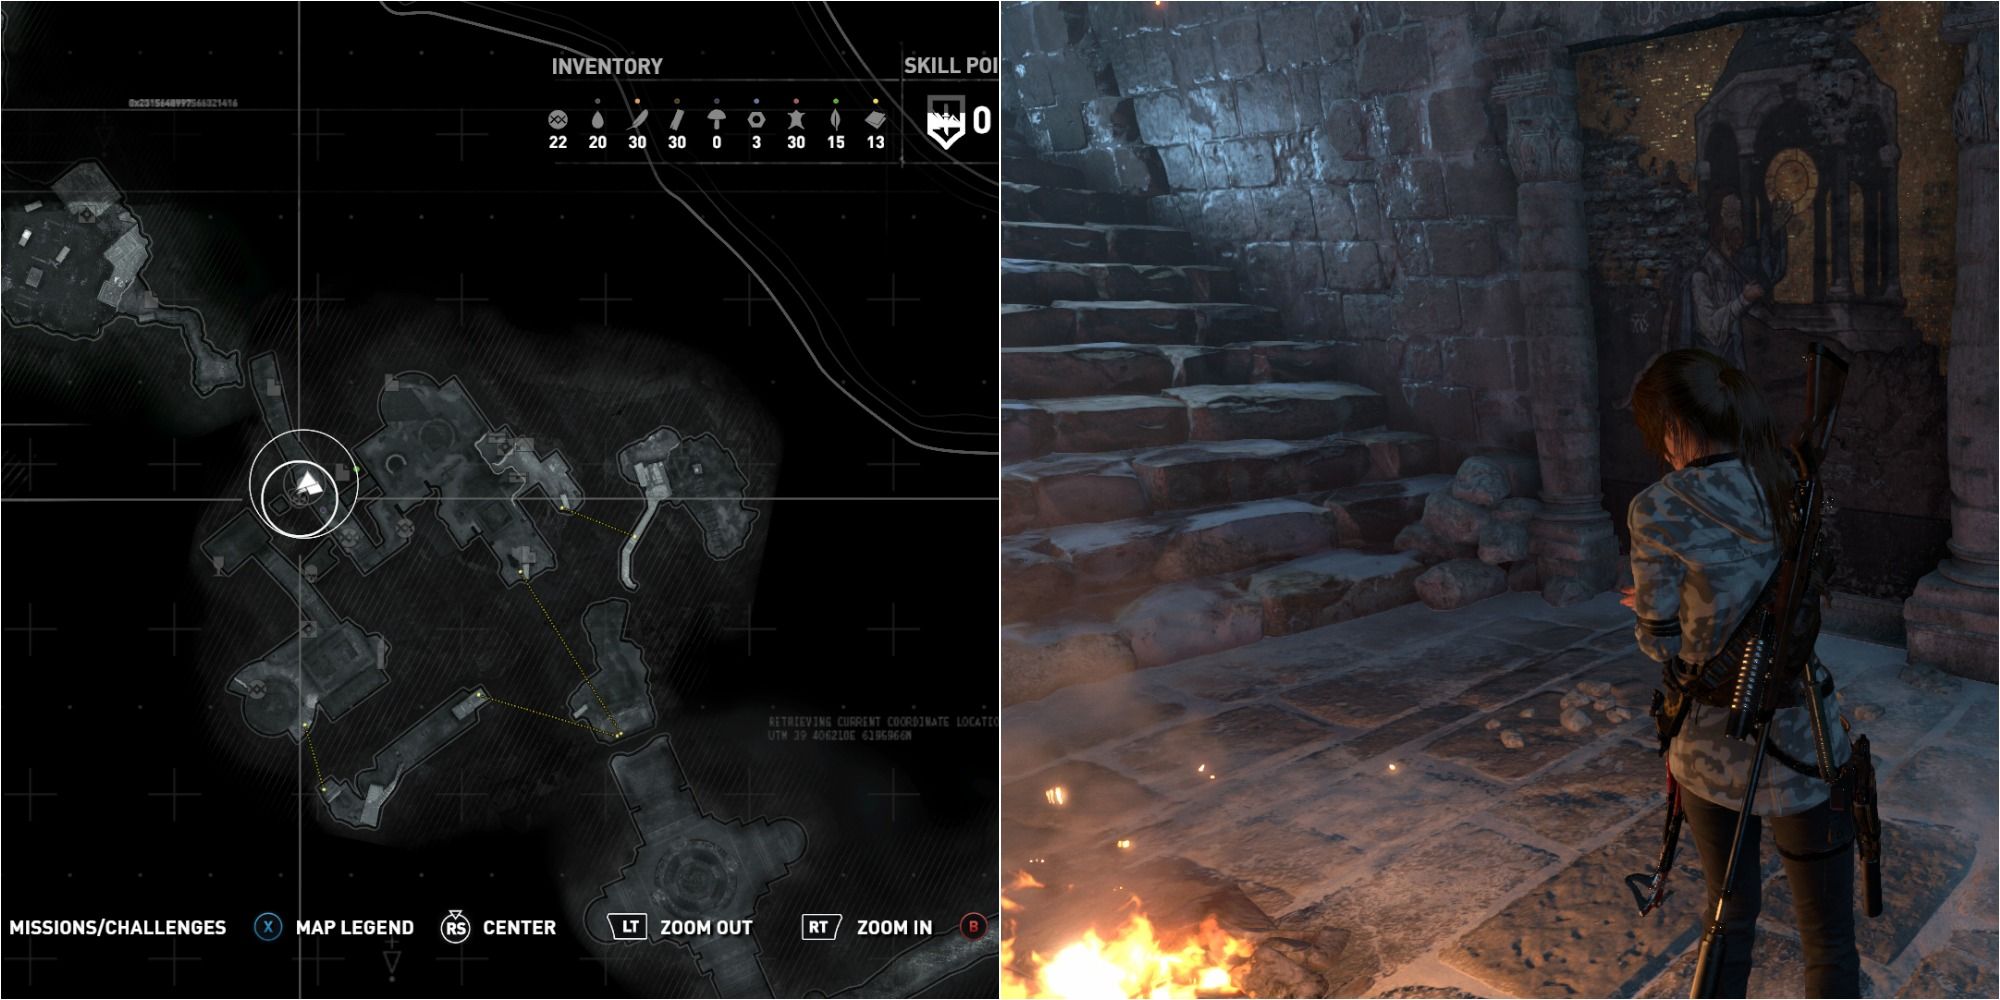 Rise Of The Tomb Raider Split Image Showing Abandoned Mines Mural Location